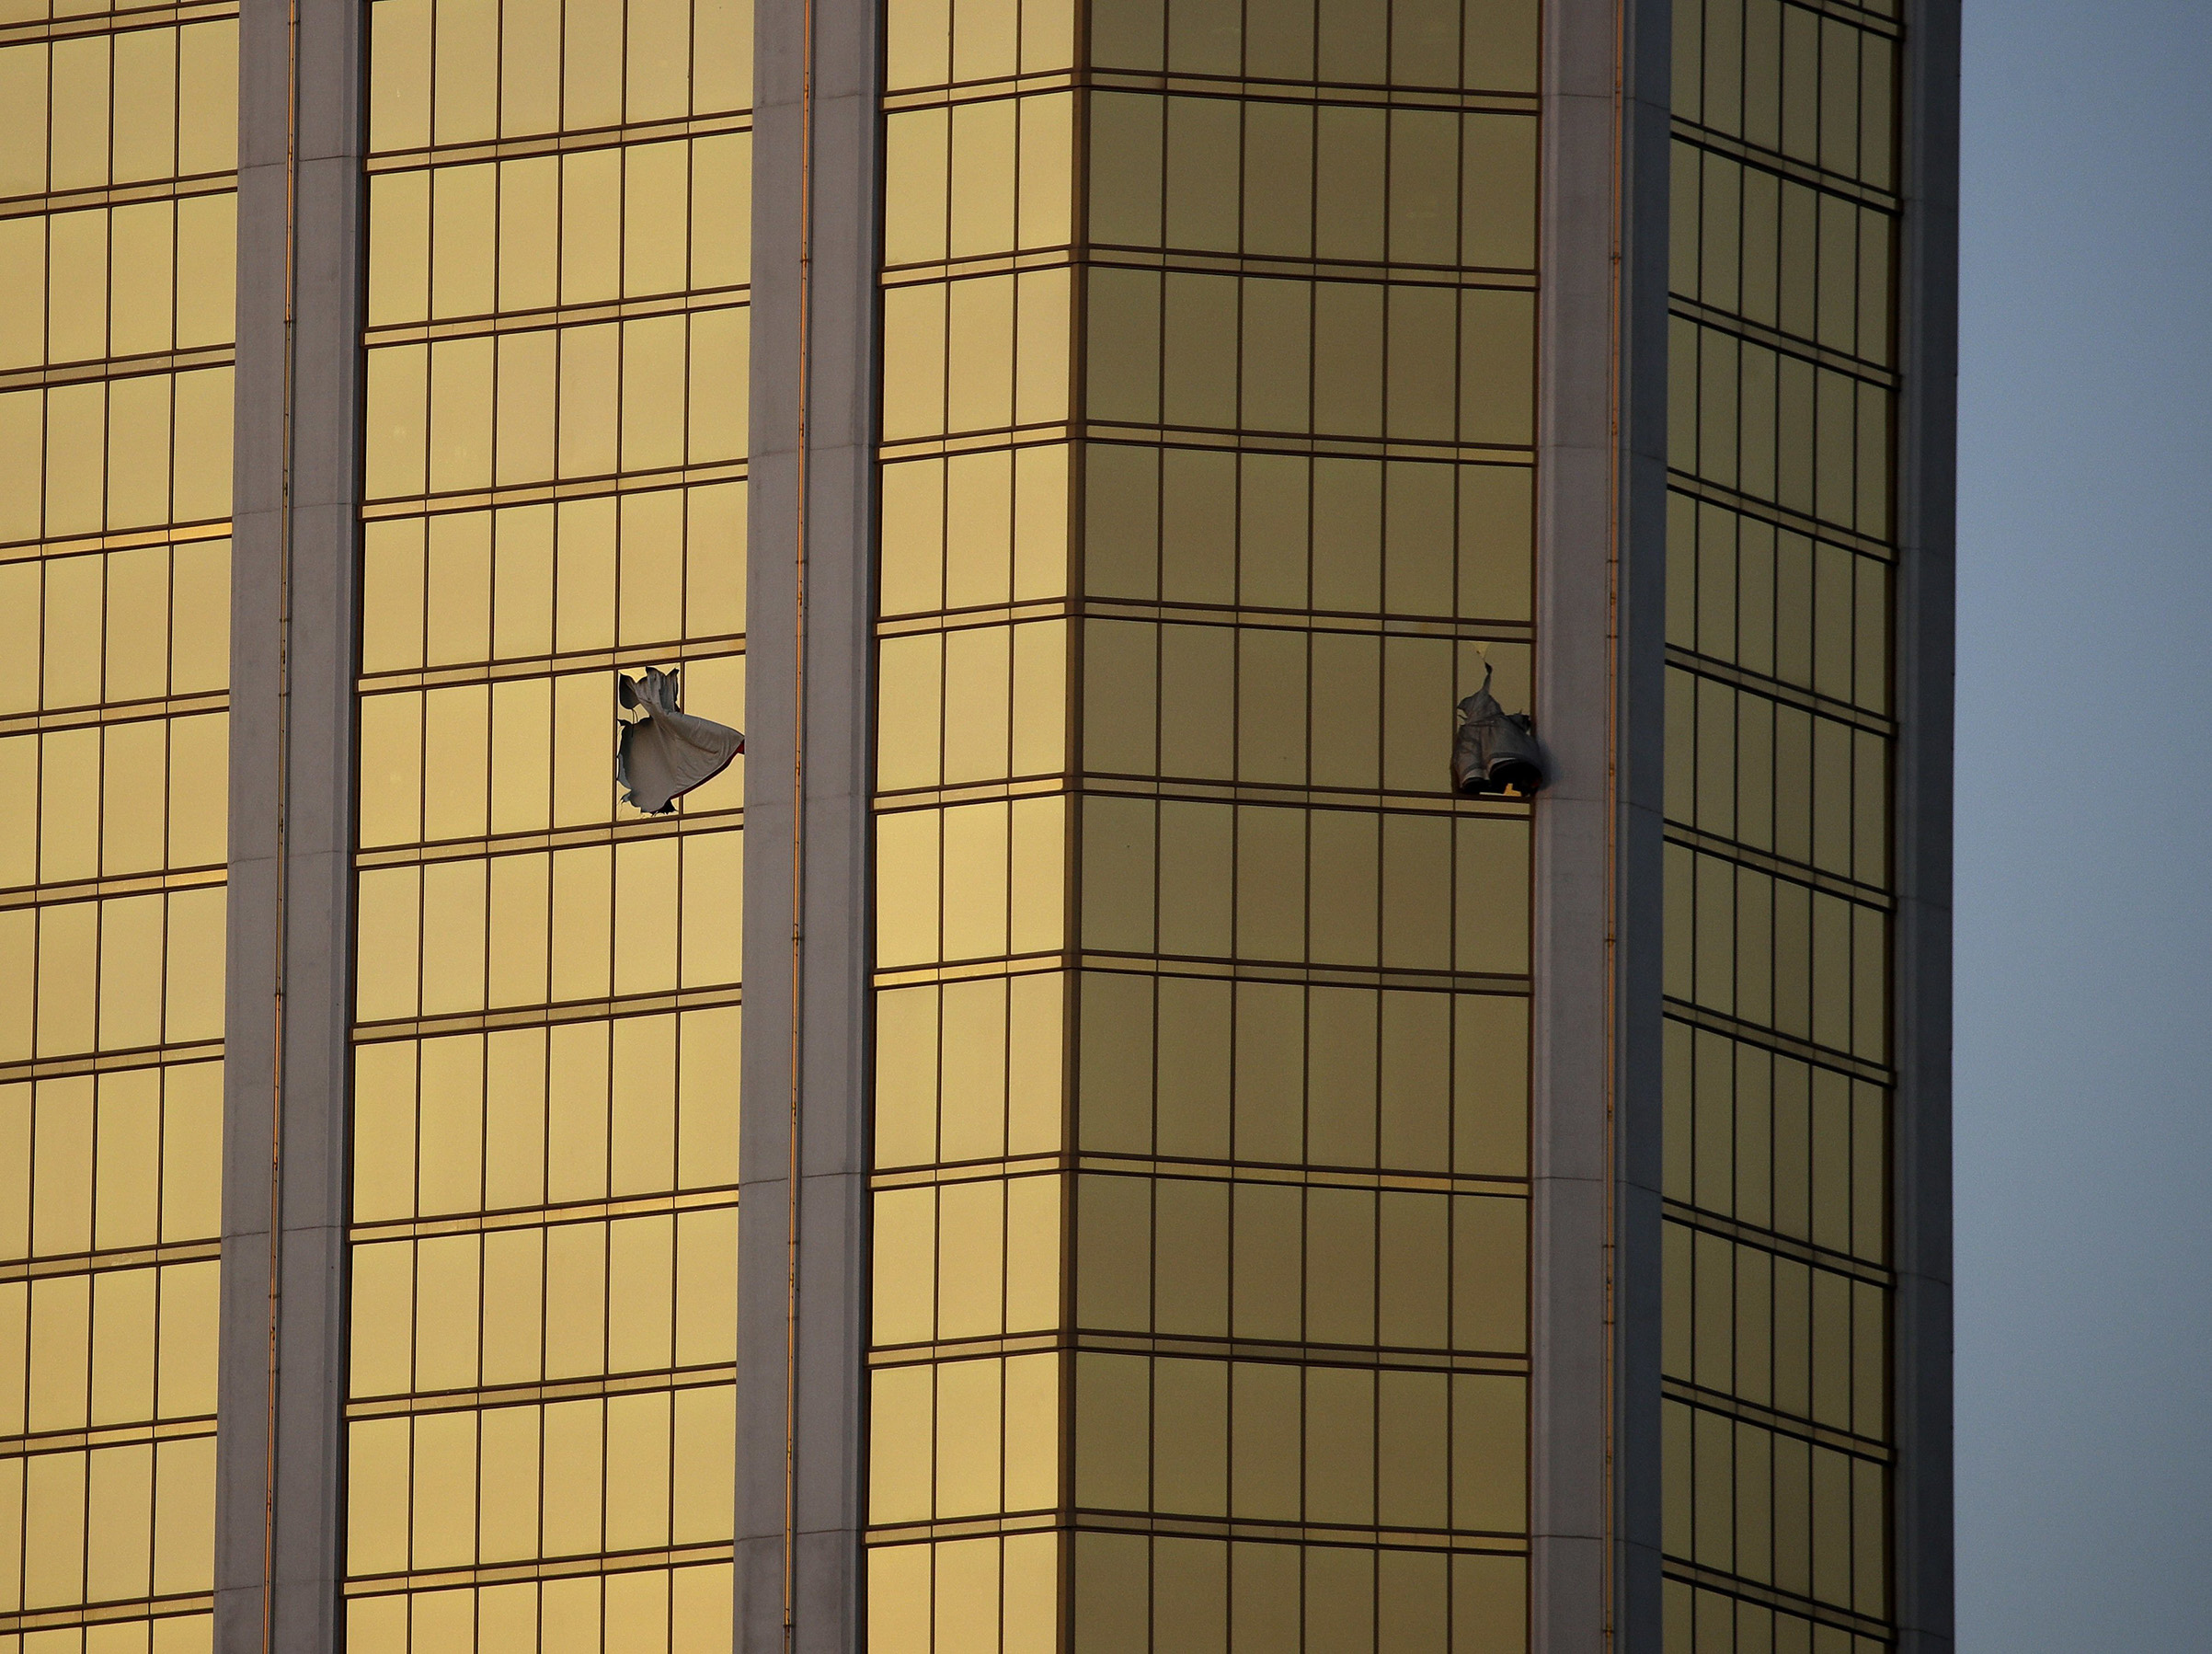 Drapes billow out of broken windows at the Mandalay Bay resort and casino, on the Las Vegas Strip following a deadly shooting at a music festival in Las Vegas on Oct 2, 2017.